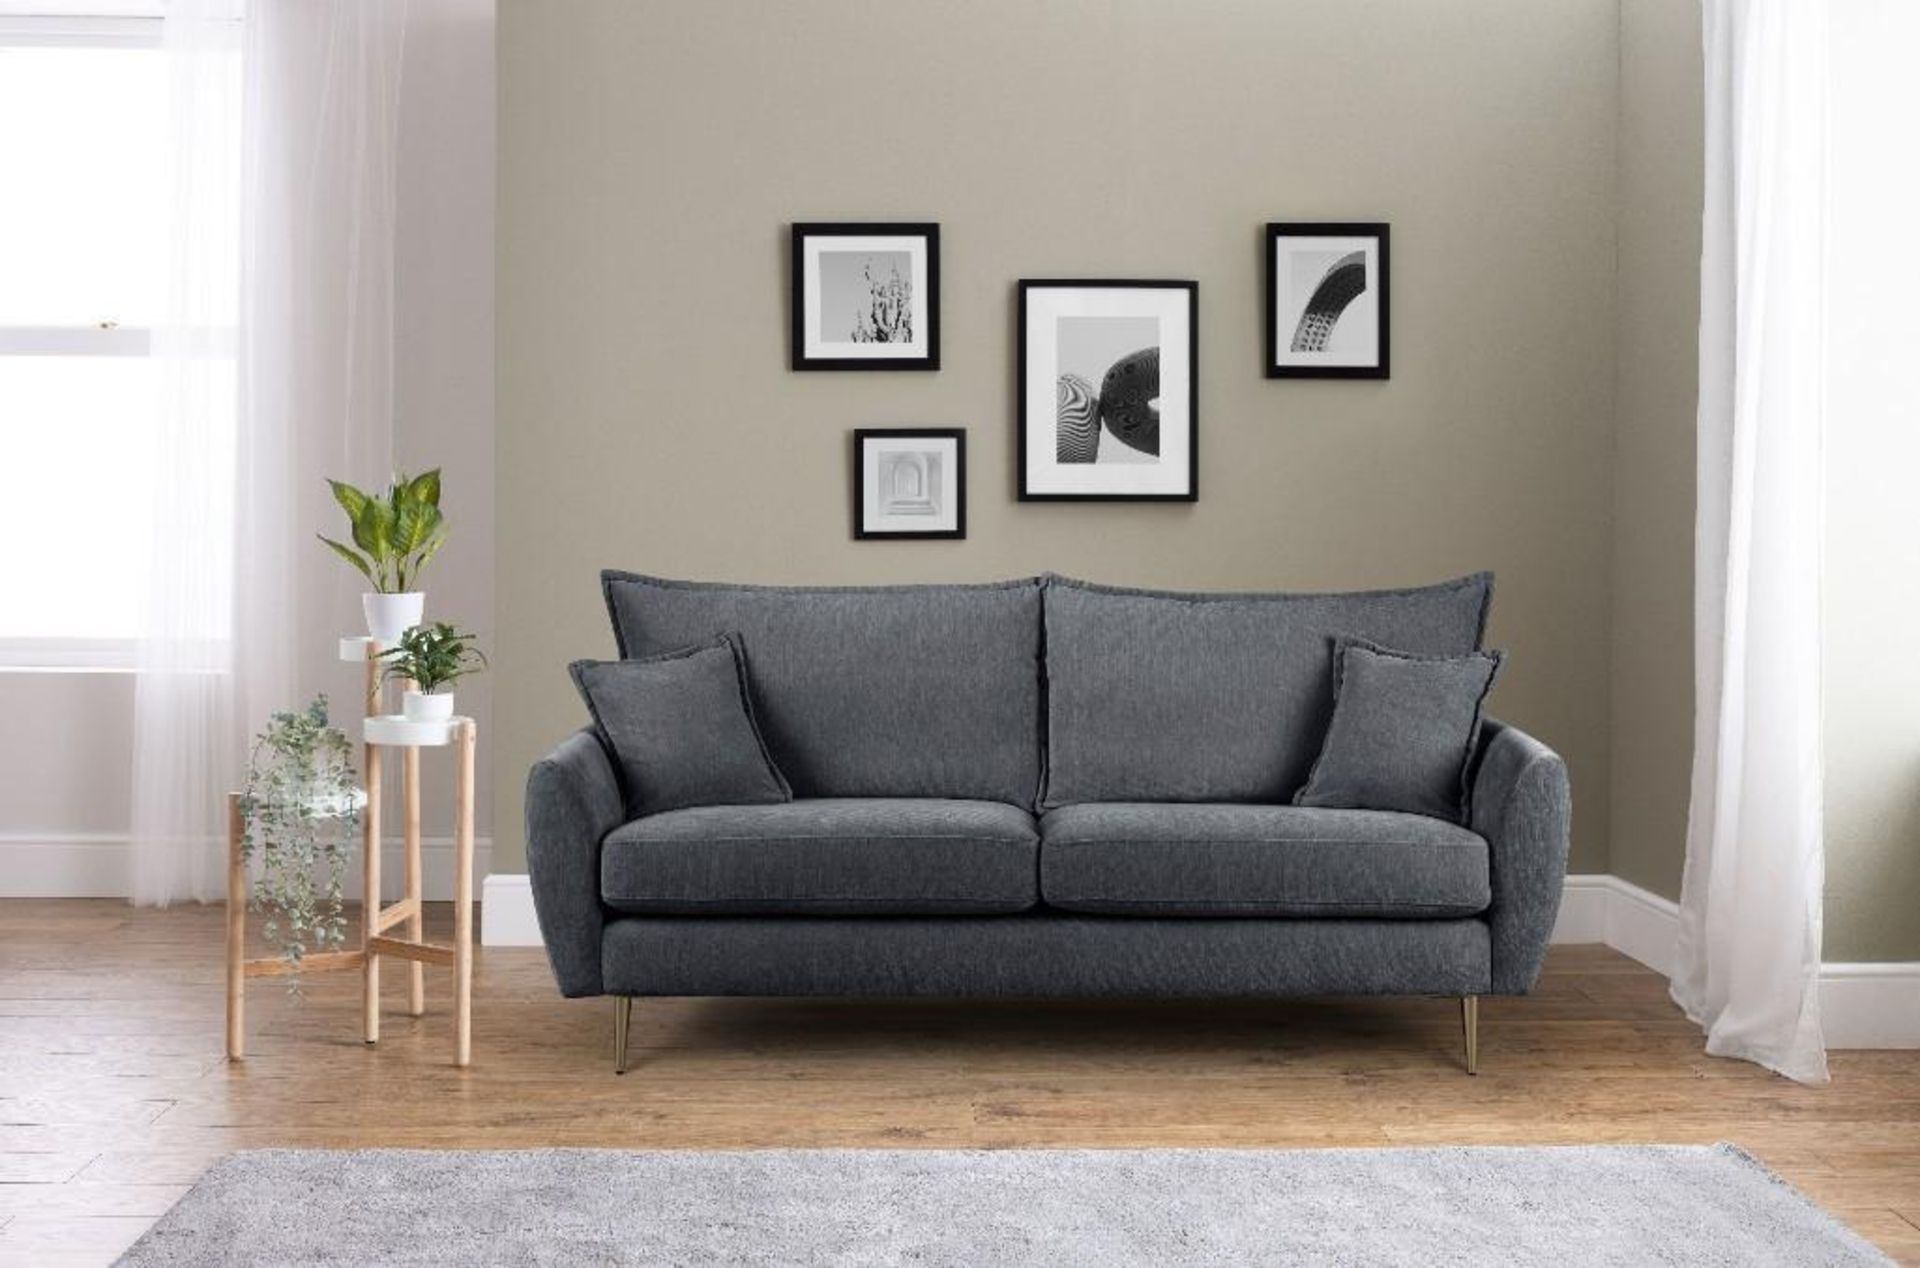 *TRADE LOT* 10 X Brand new Boxed 3 Seater Milano Sofa in Charcoal